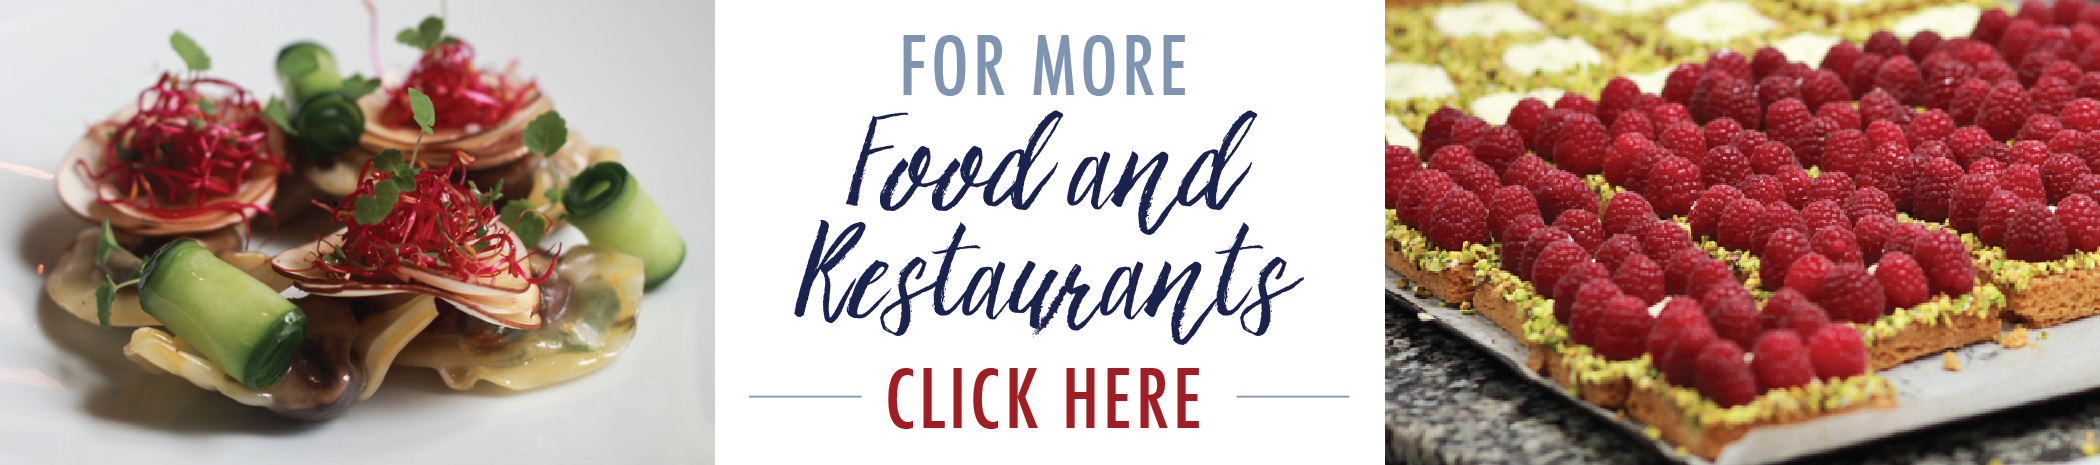 Lost In Cheeseland Food and Restaurant posts 